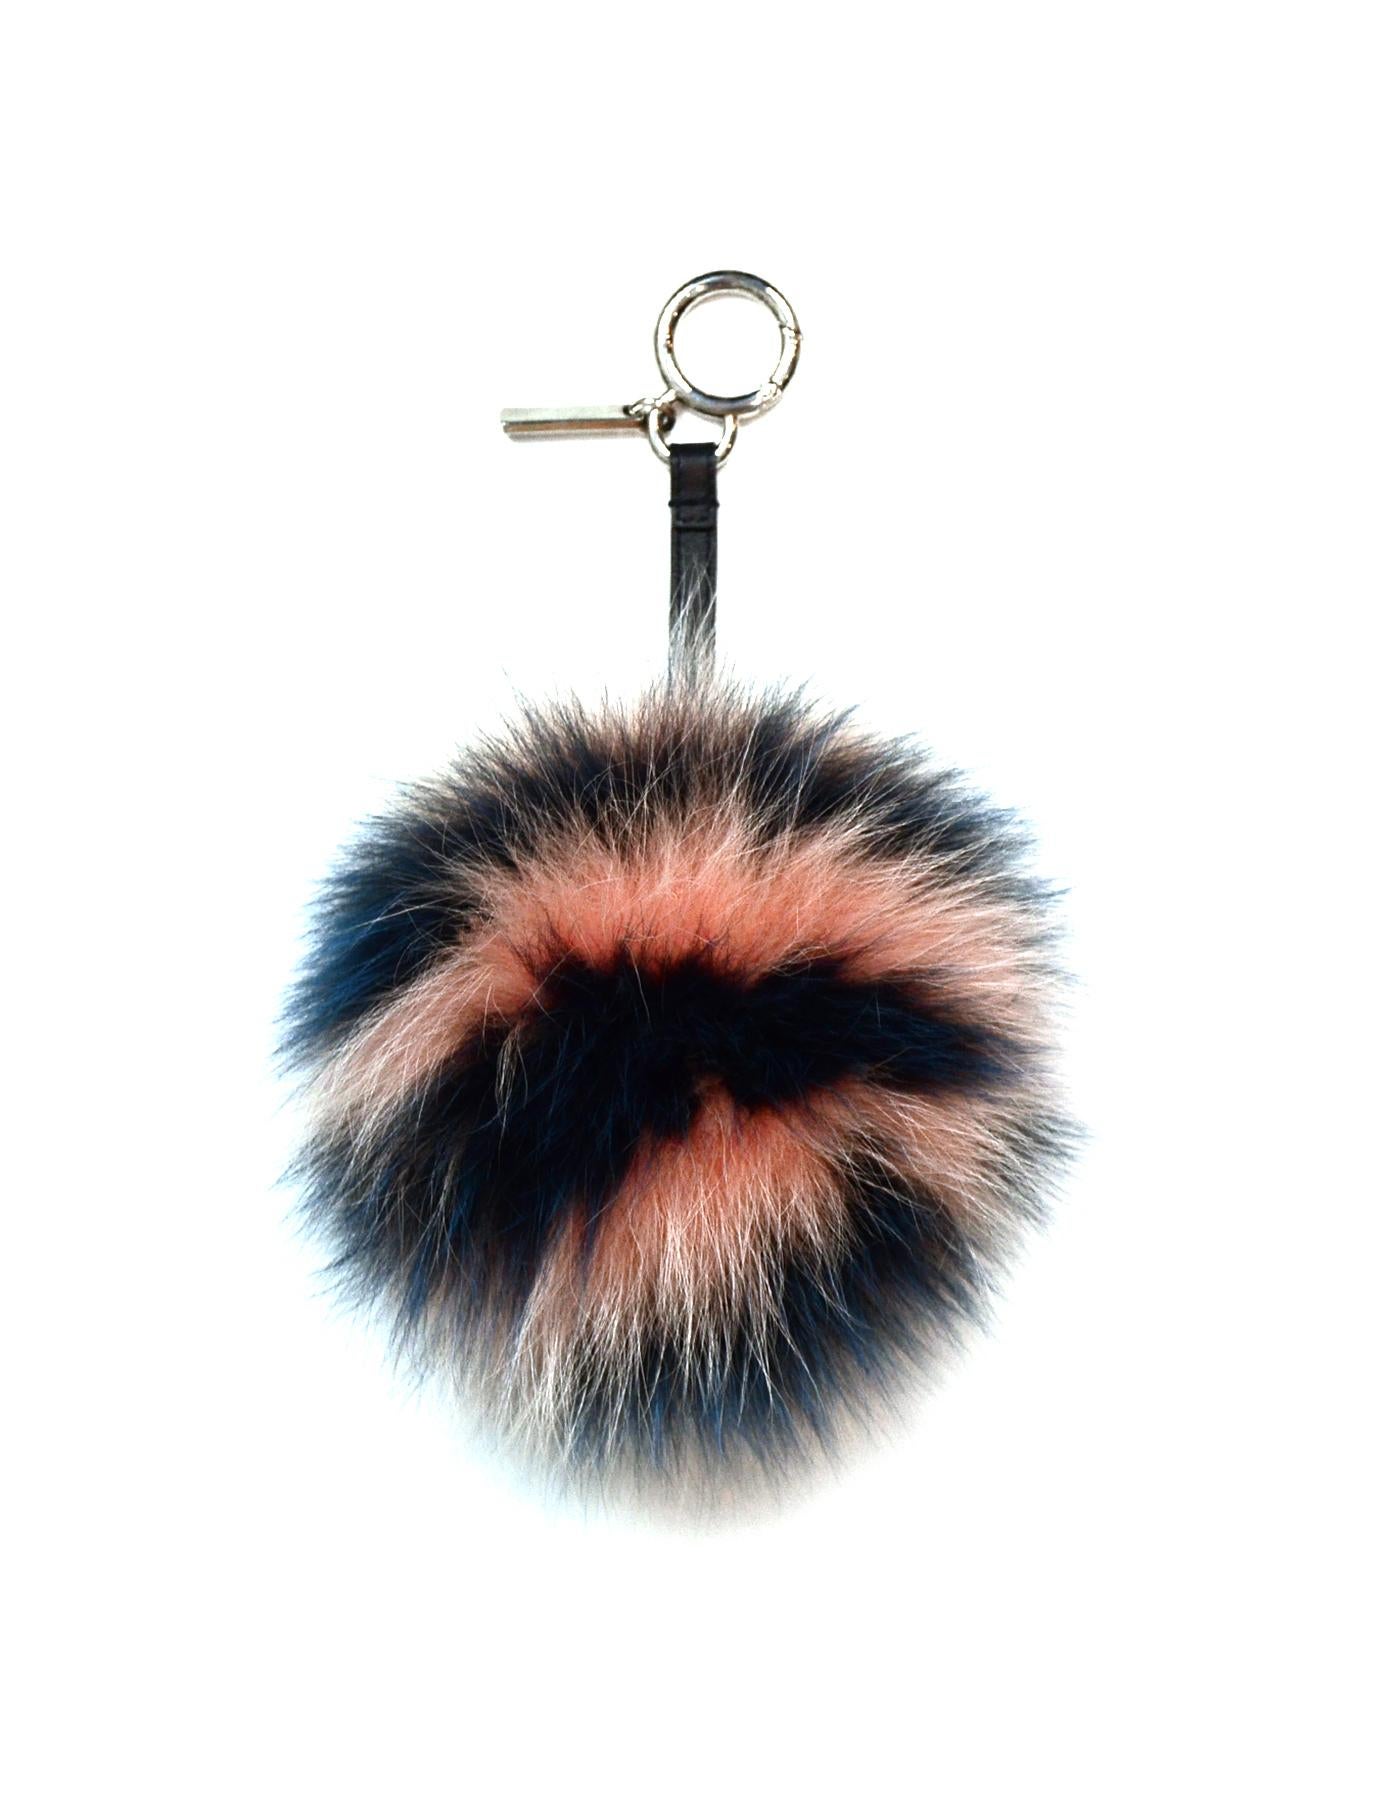 Fendi Peach Blue Stripe Fox Fur Pom Pom Bag Charm

Made In: Italy
Color: Peach, Blue
Materials: Fox Fur, Leather, Metal
Overall Condition: Excellent pre-owned condition
Estimated Retail: $650 + tax

Measurements: 
approx. 6